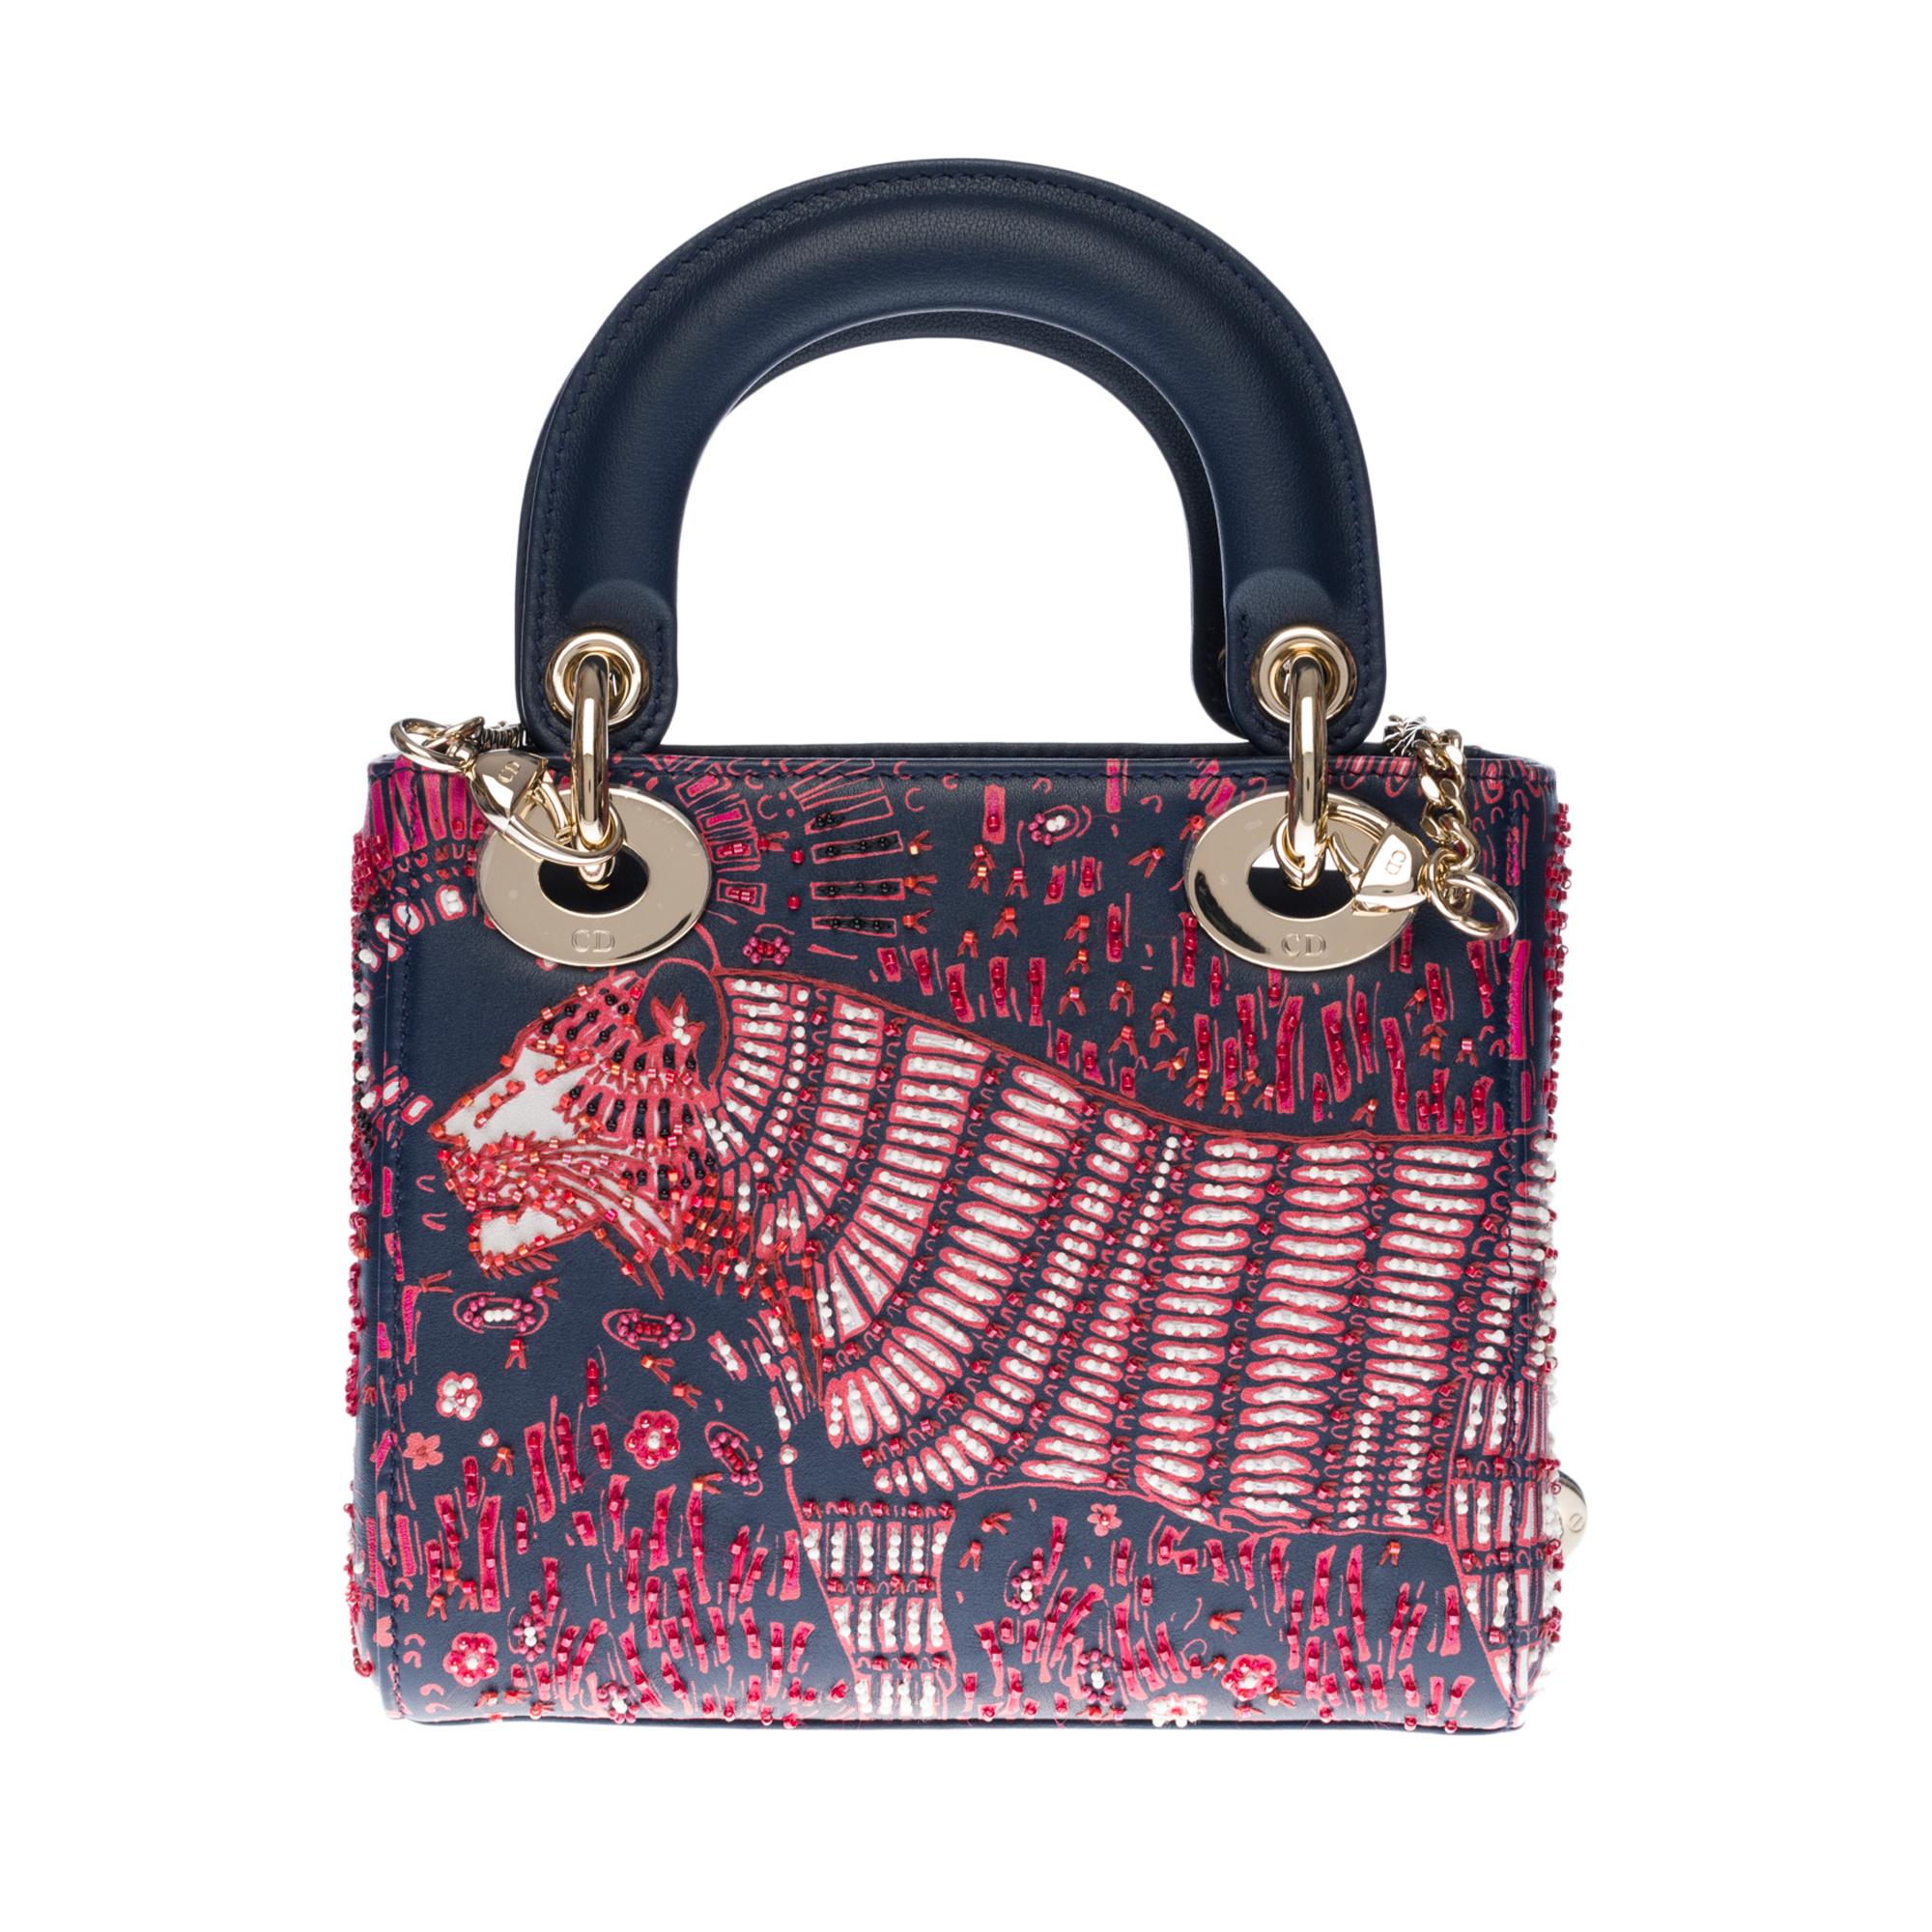 The Lady Dior Mini bag embodies the classic elegance combined with the modernity of Dior. This limited edition creation of the Marrakech 2020 Collection is made of navy blue lambskin with red and white beads, light gold metal hardware
The thick